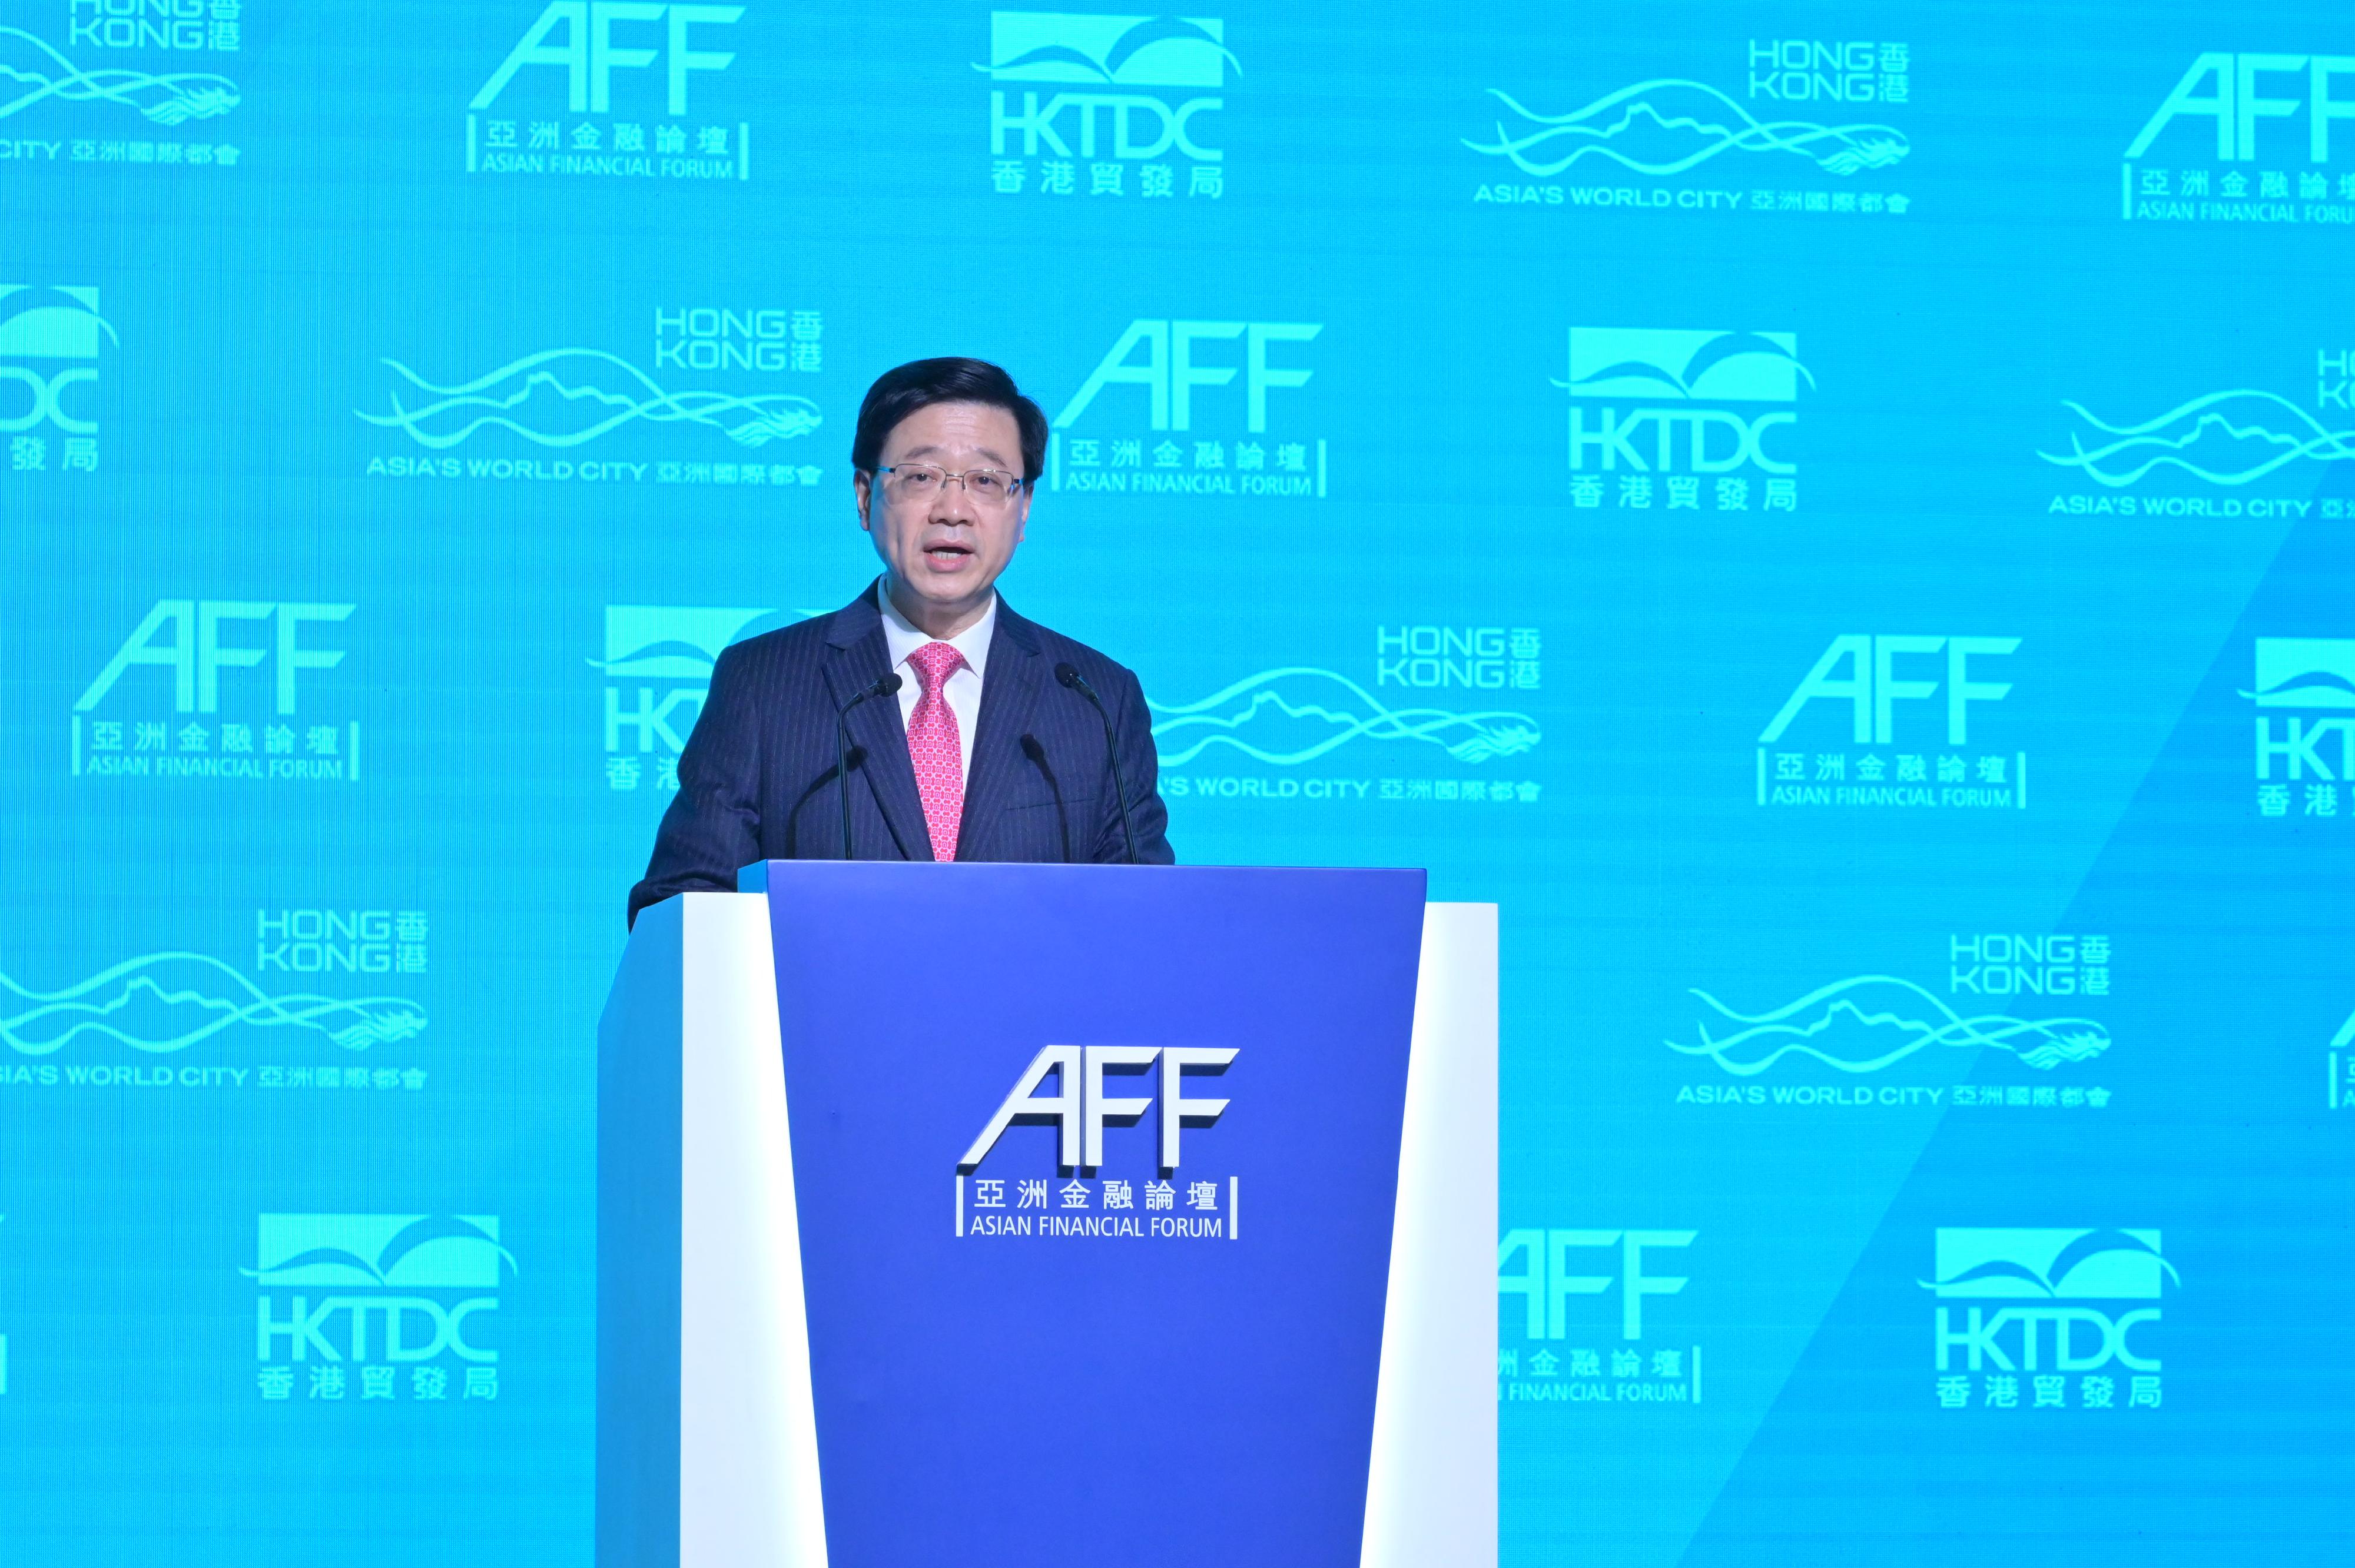 The Chief Executive, Mr John Lee, delivers the opening remarks at the Asian Financial Forum at the Hong Kong Convention and Exhibition Centre this morning (January 11).